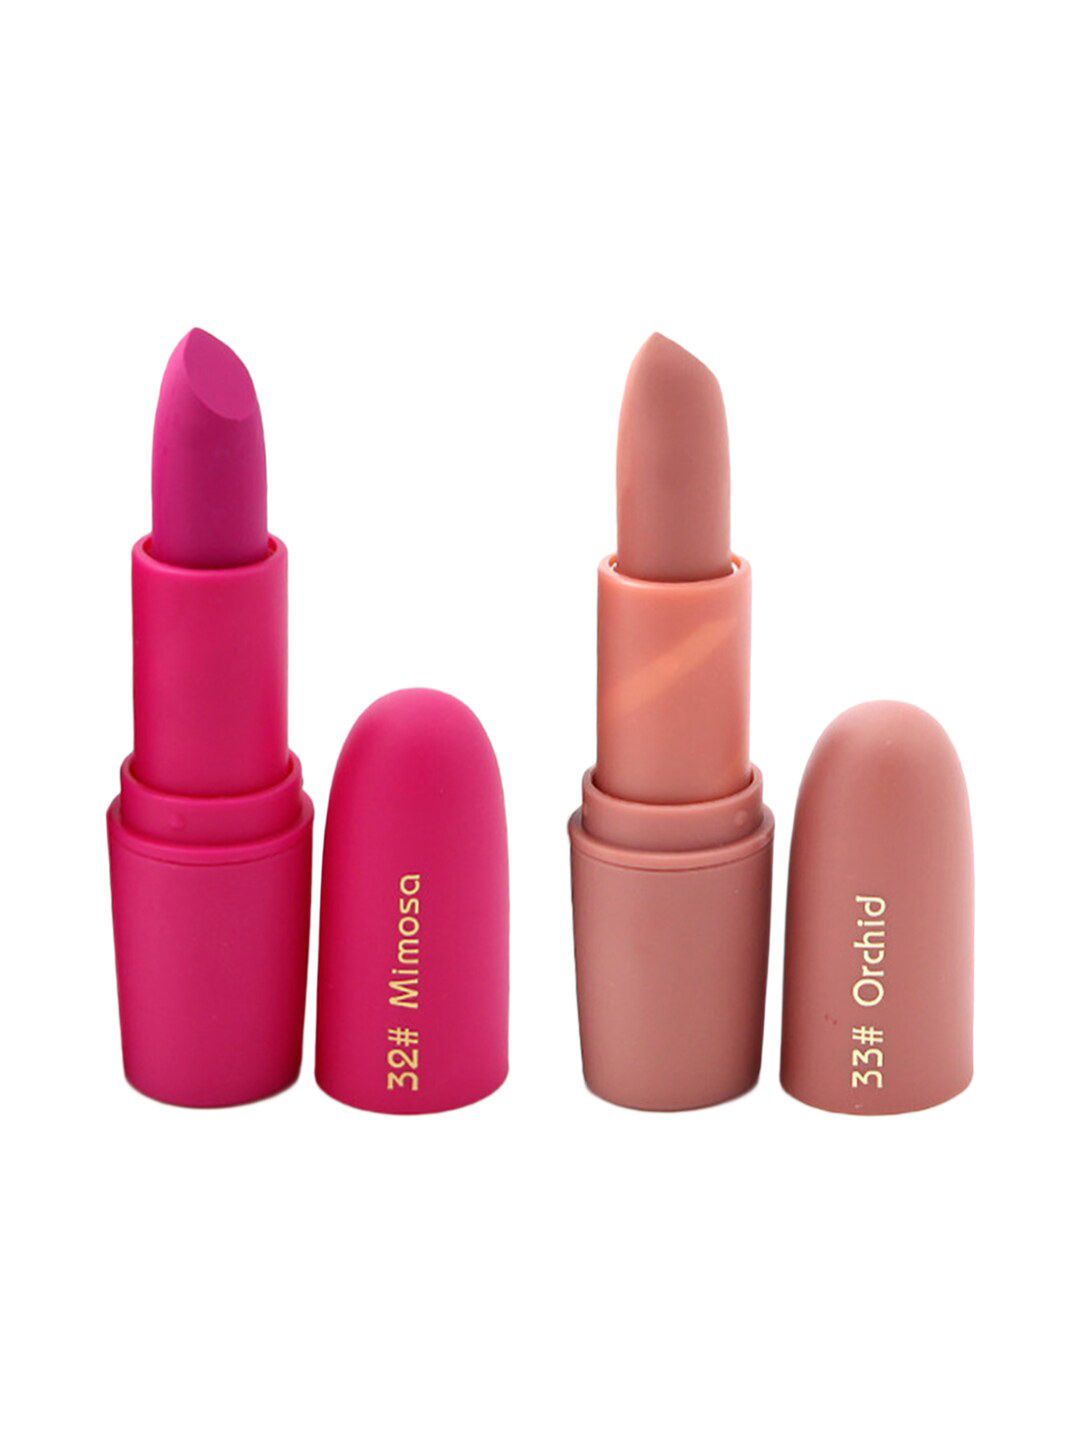 MISS ROSE Set of 2 Matte Creamy Bullet Lipsticks - 32 Mimosa & 33 Orchid Price in India